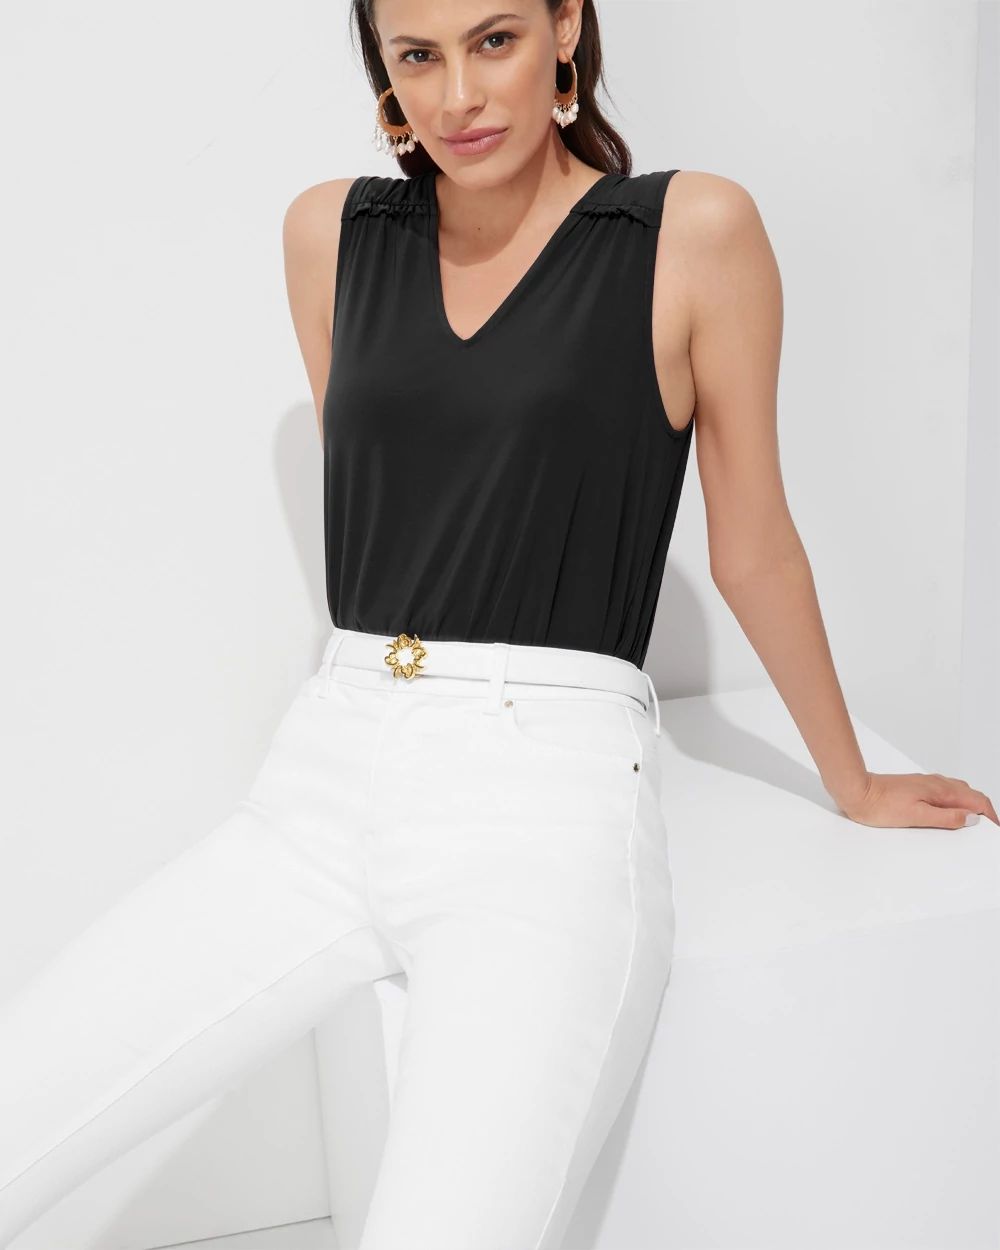 Outlet WHBM Banded-Hem Top click to view larger image.